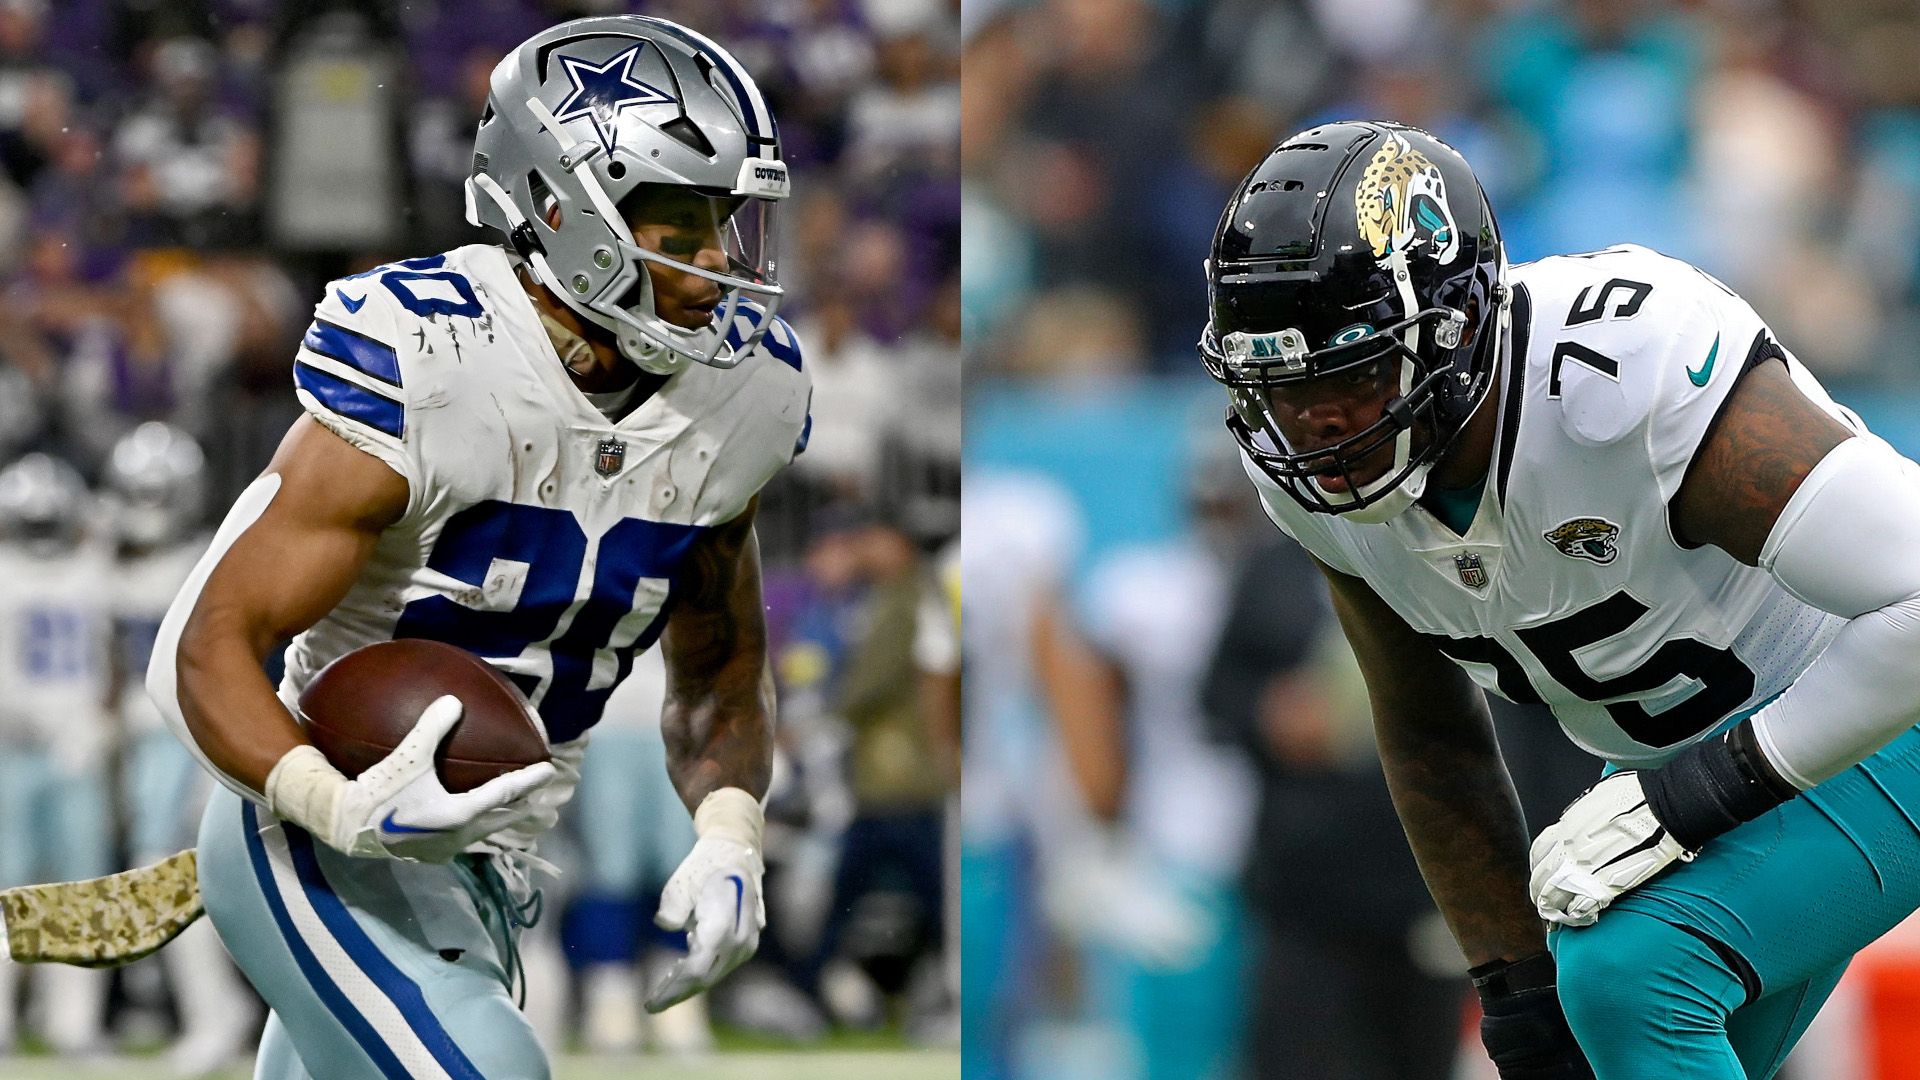 Cowboys vs Jaguars live stream how to watch NFL online and on TV from